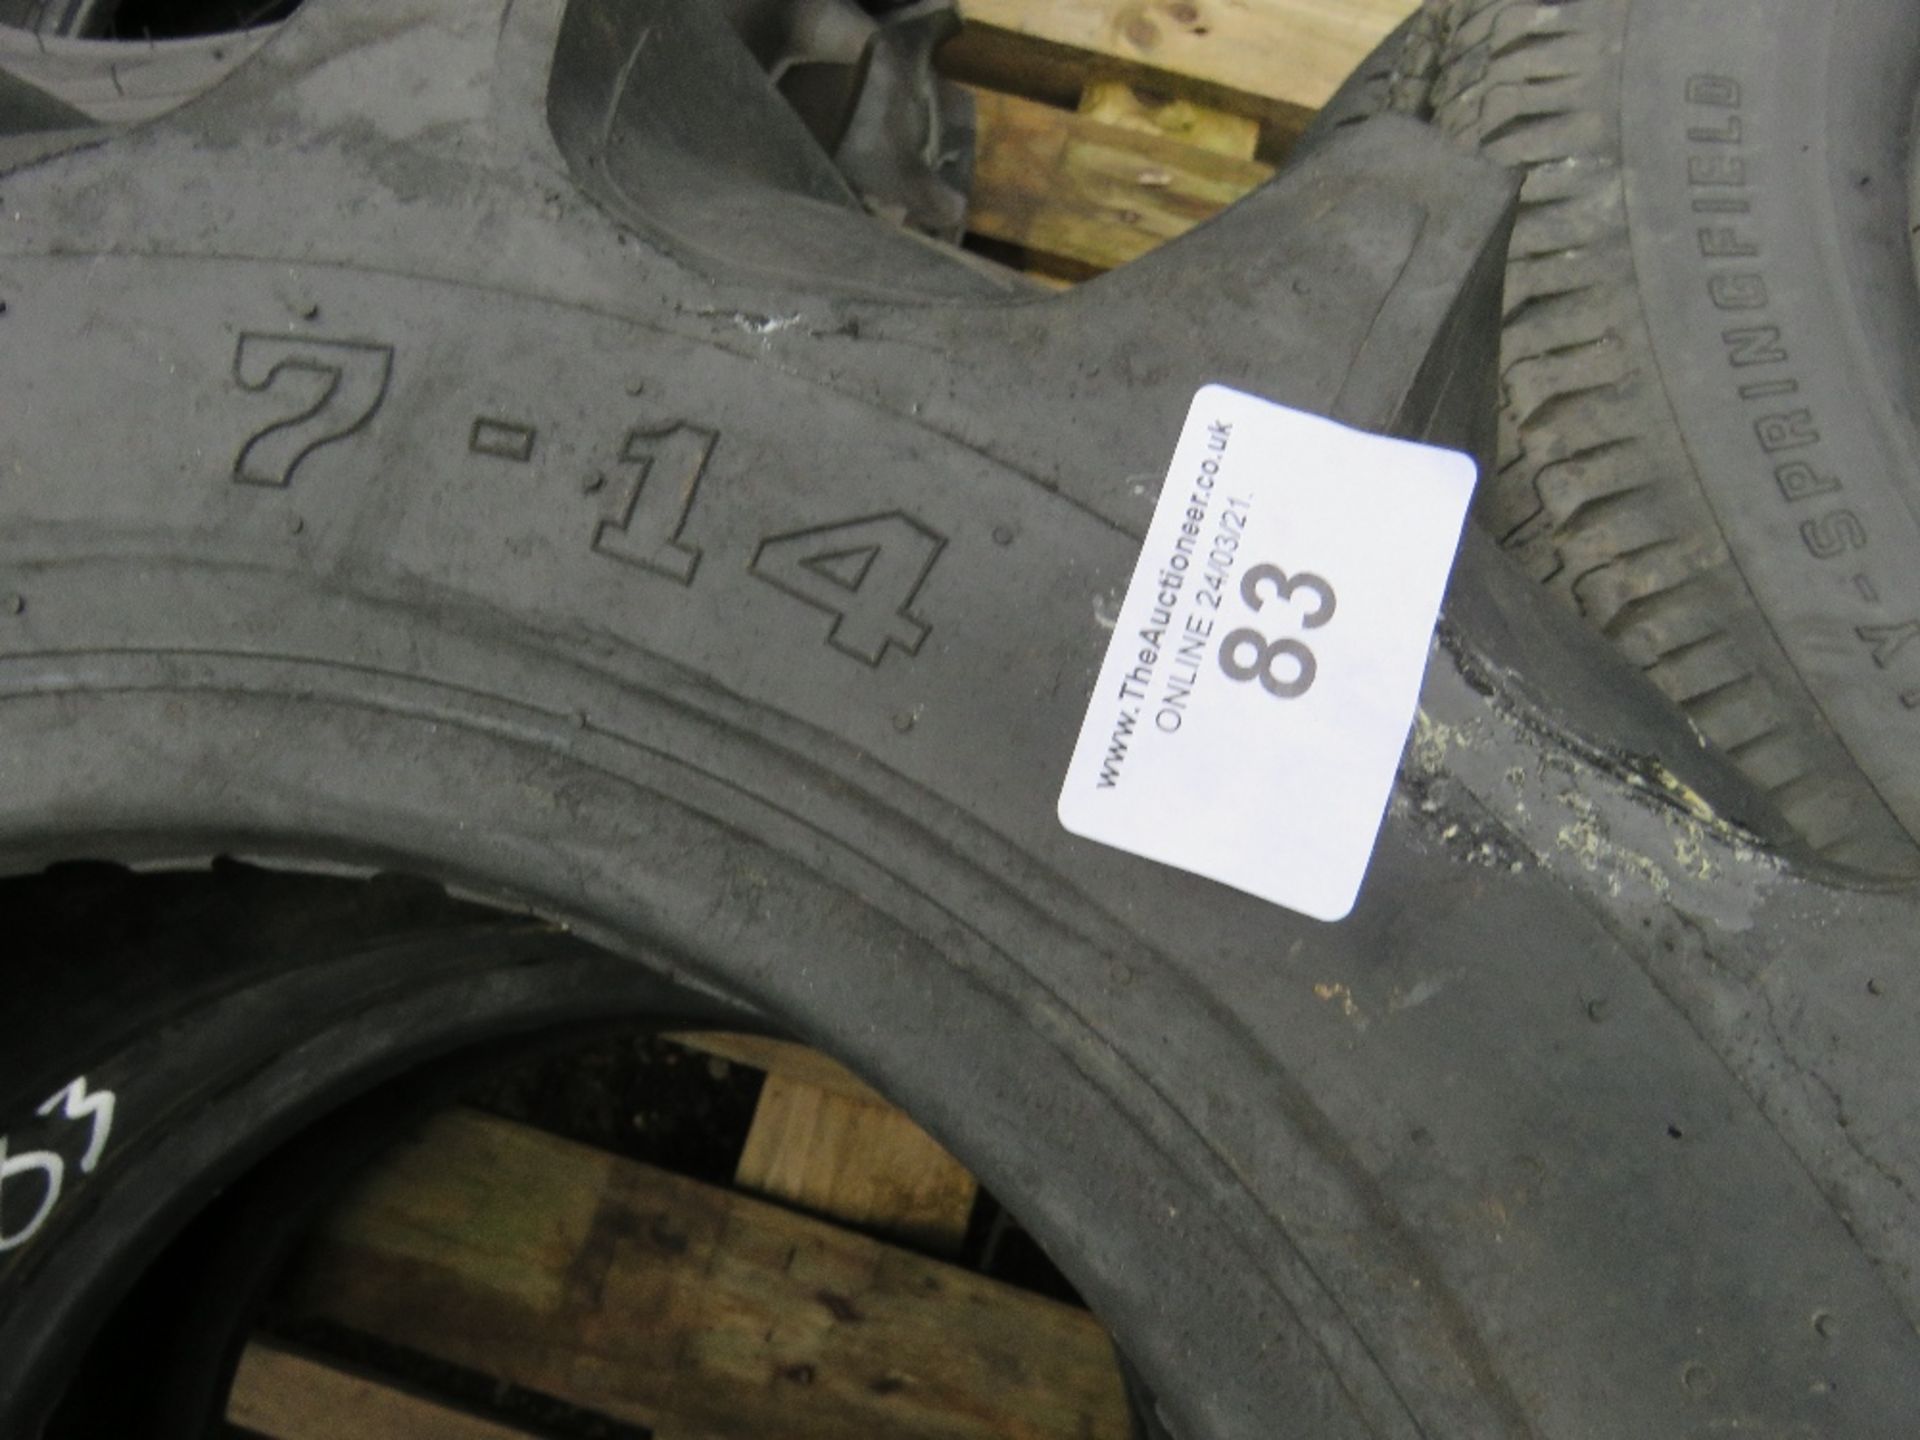 2NO 7-14 AGRICULTURAL COMPACT TRACTOR TYRES, LITTLE USED. - Image 3 of 3